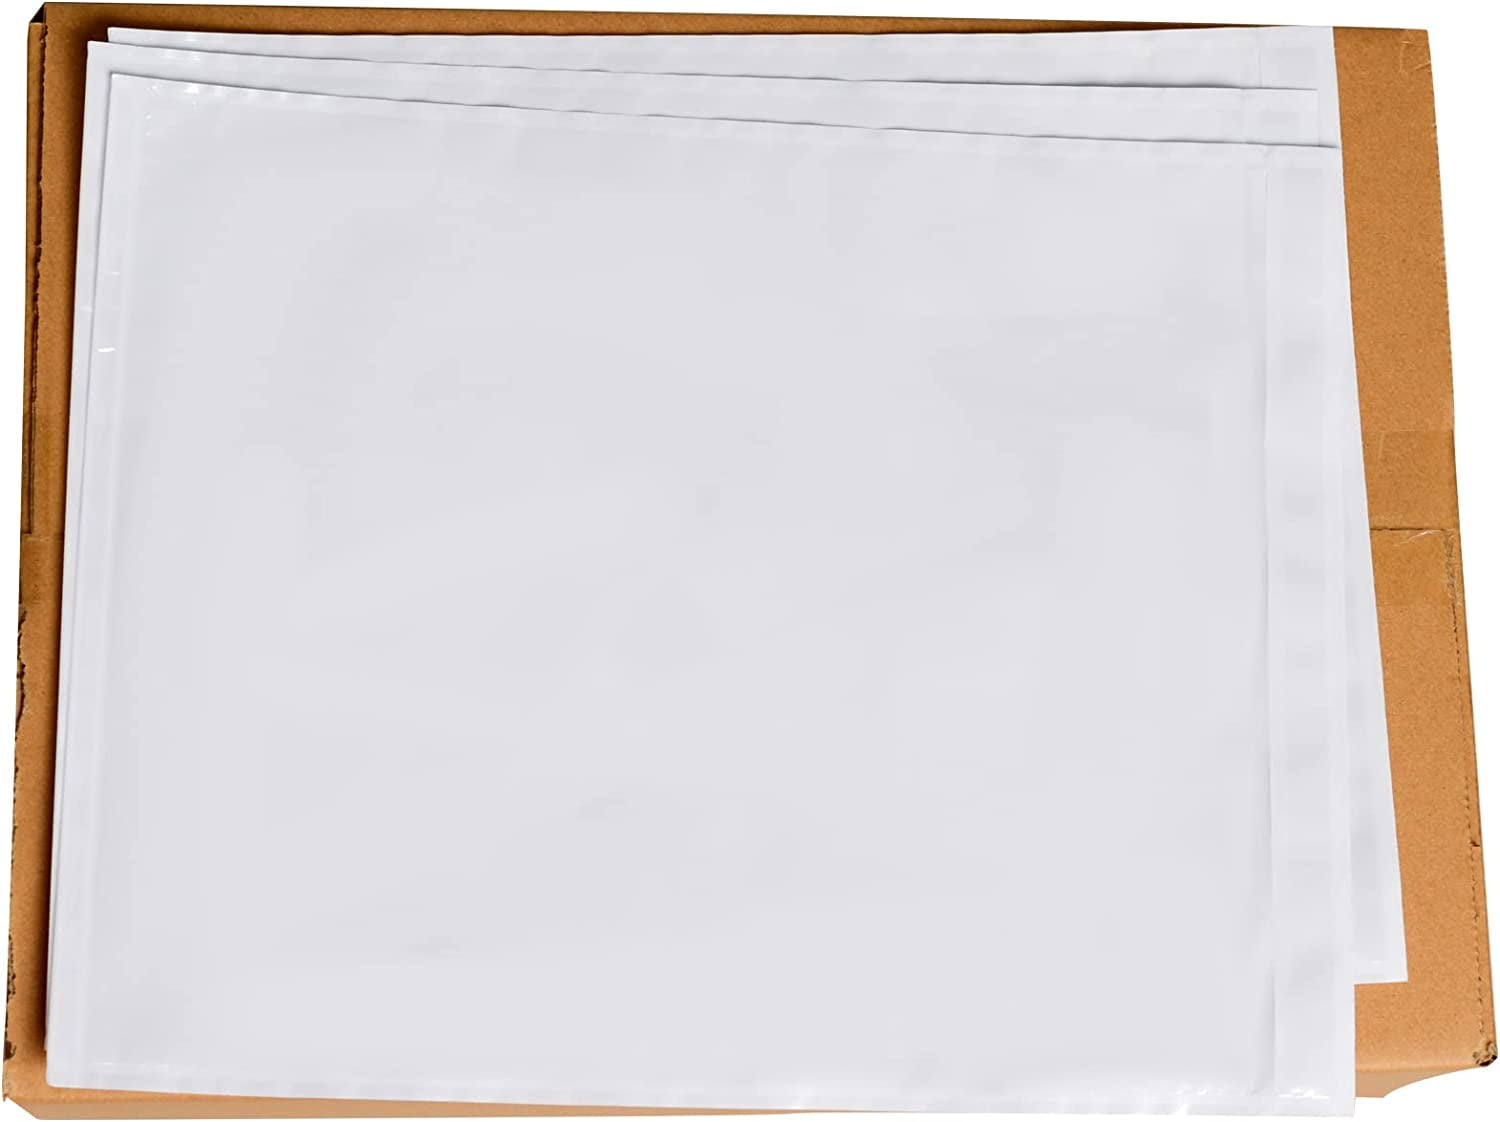 2-Mil Polyethylene Tear-Resistant w Peel-Off Full Adhesive Backing - Case of 500 9.5 x 12 Clear Packing List Envelopes Laddawn 3898 